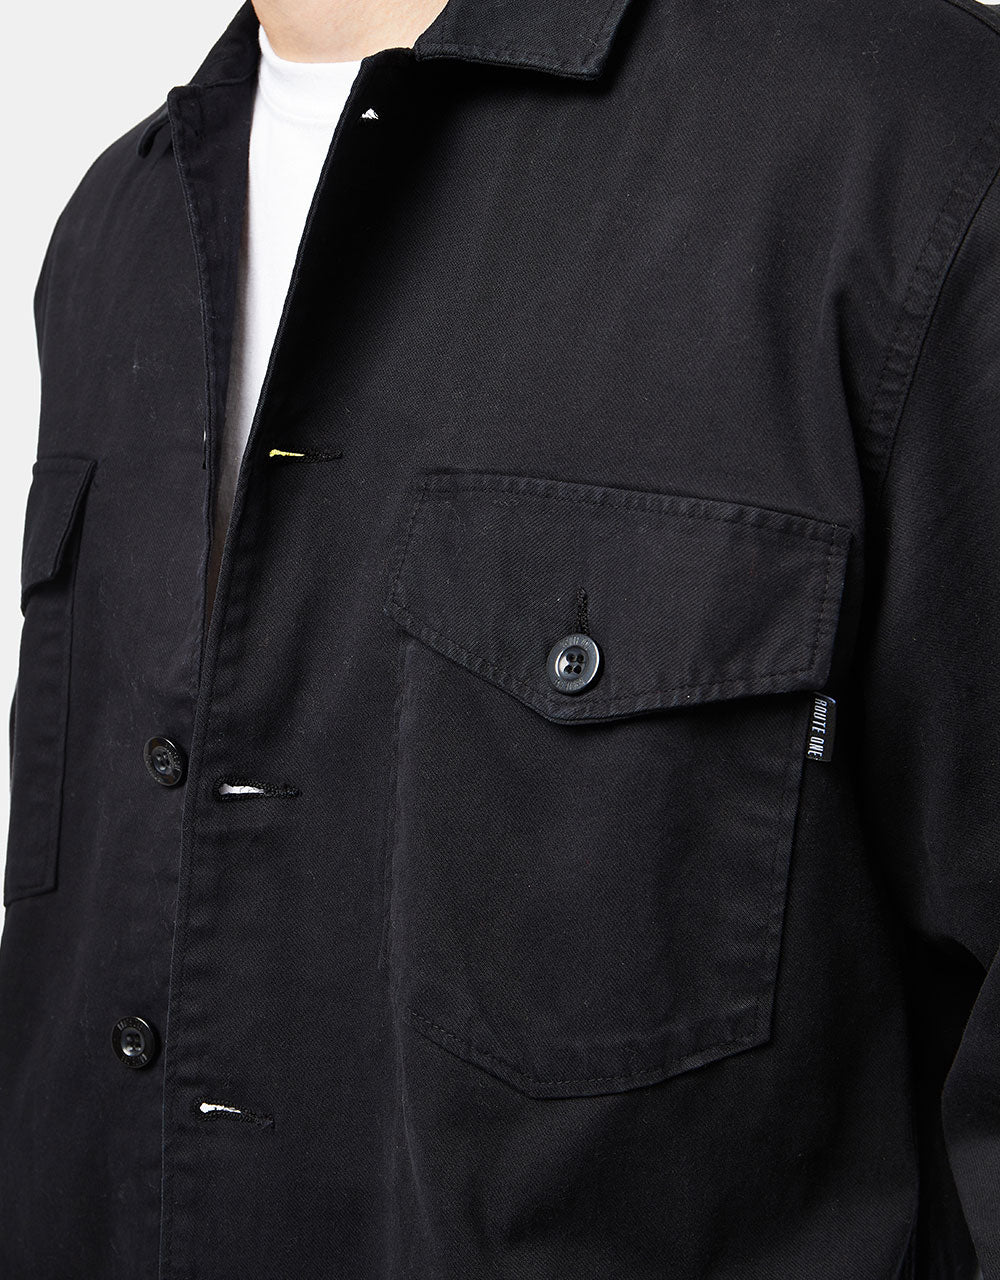 Route One Military Shirt - Black